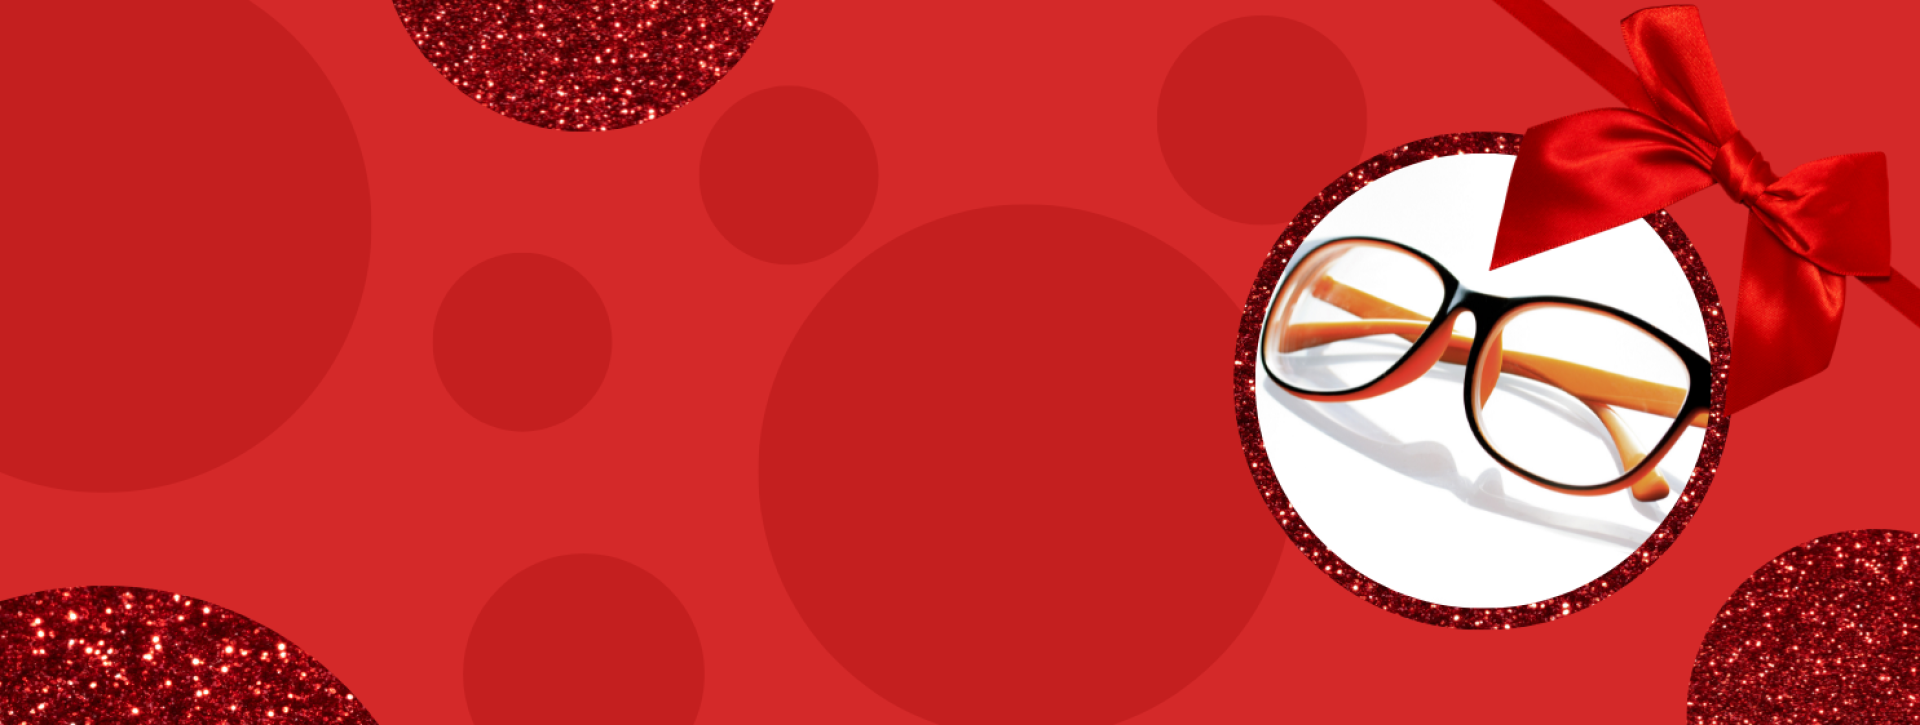 Red background with darker red and sparkly circles